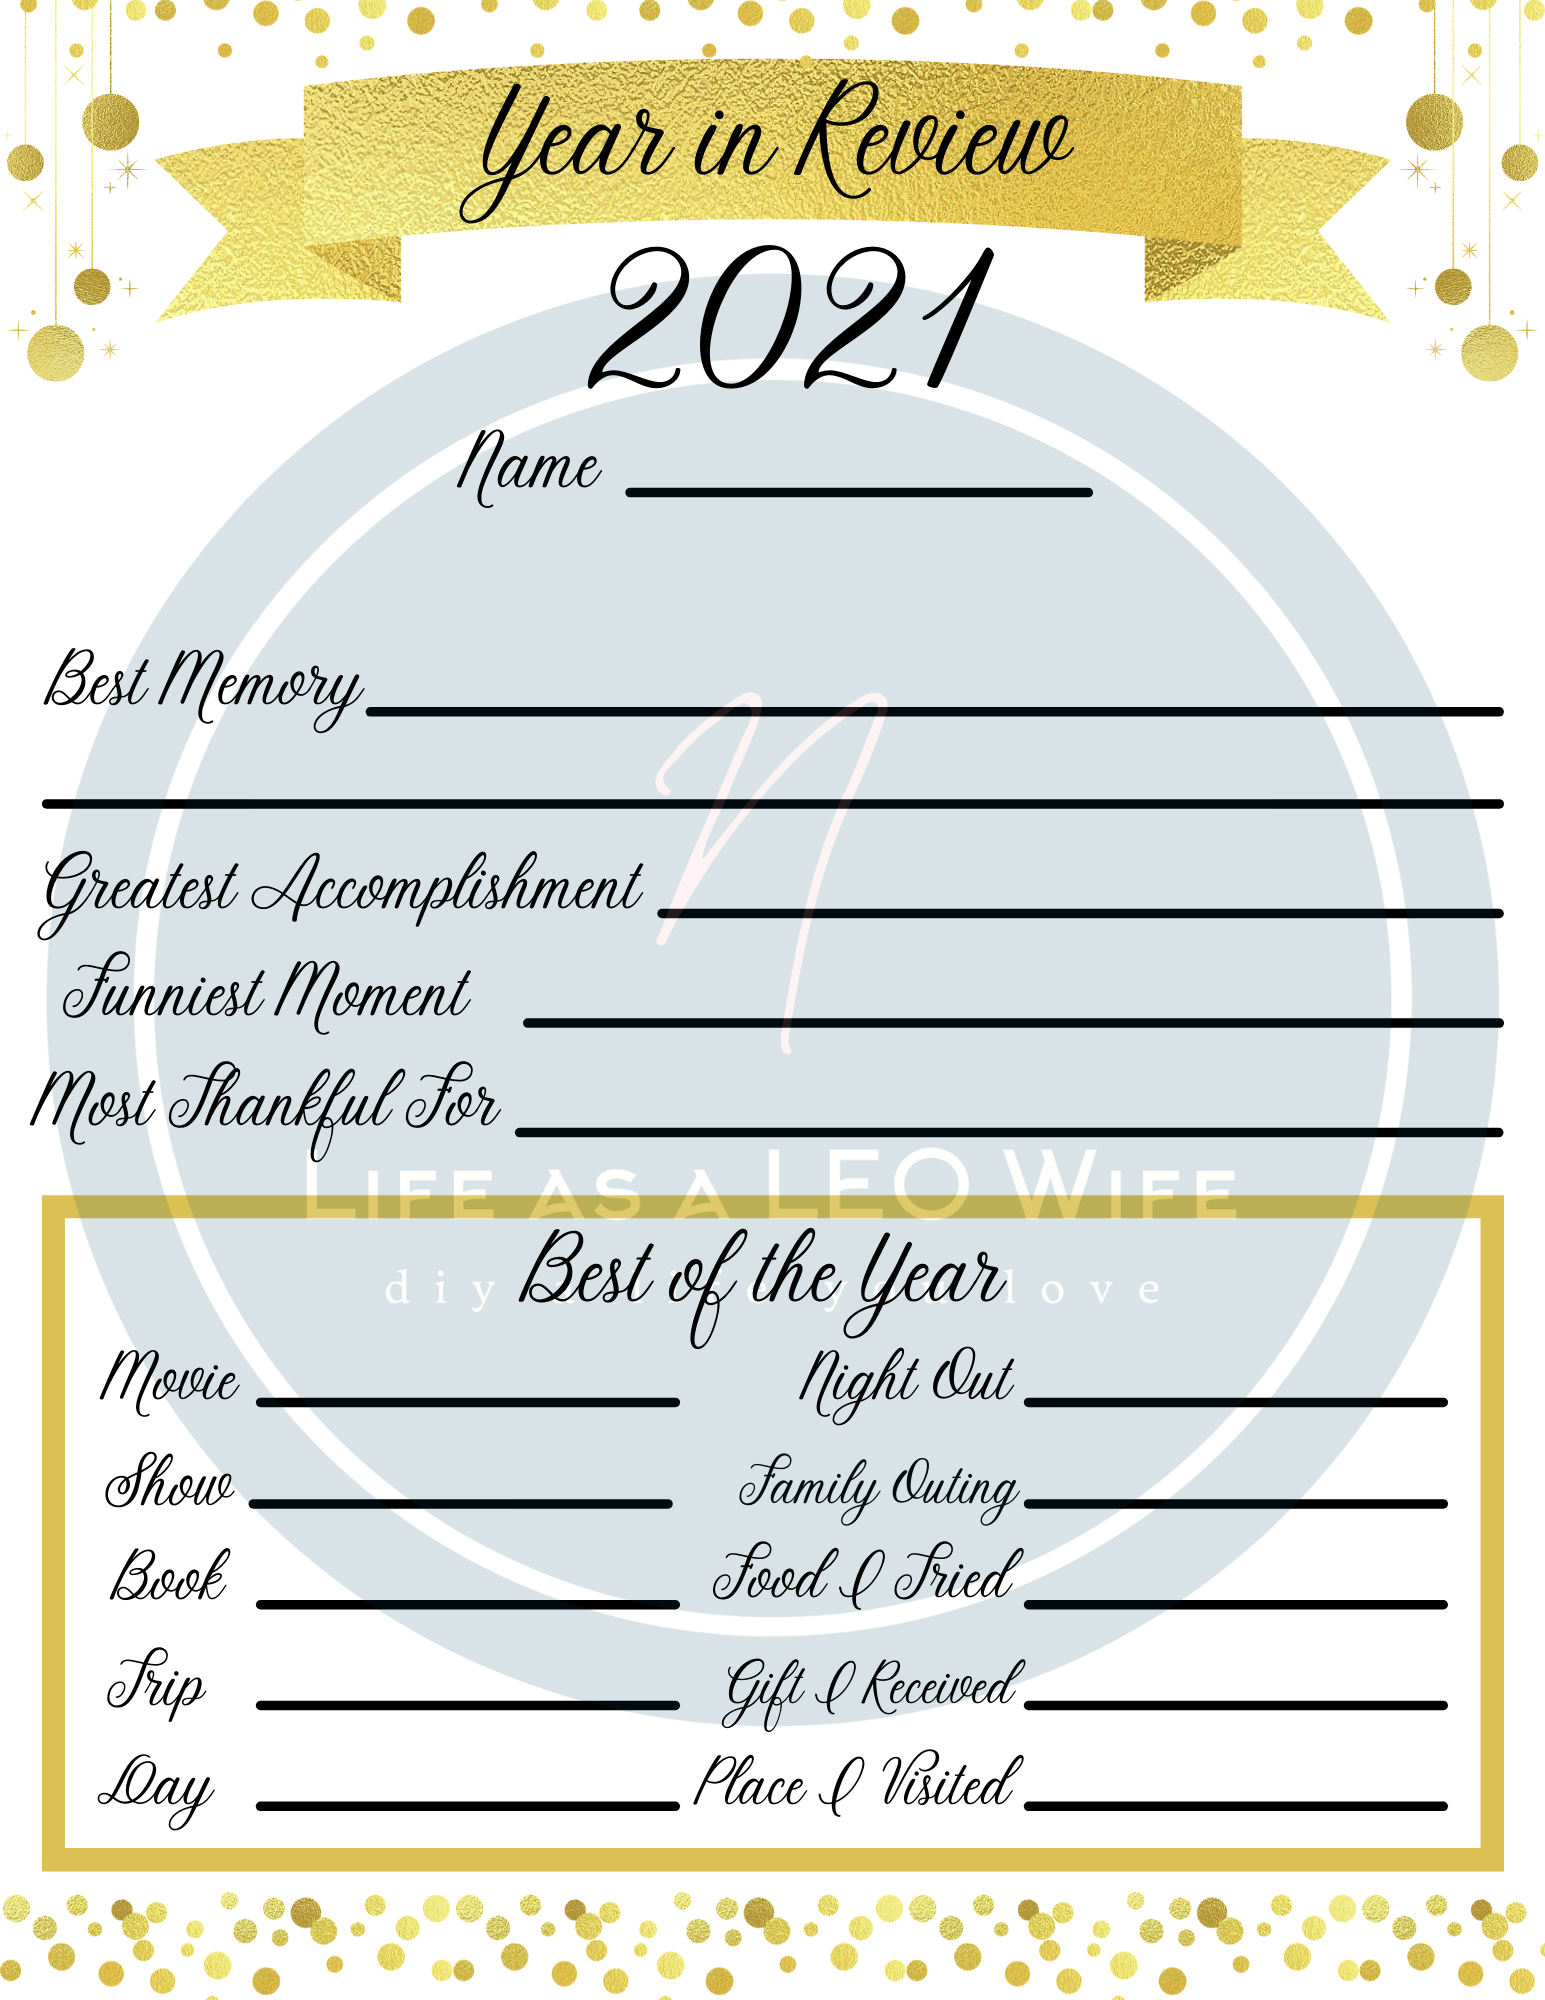 New Year's free printables: 2021 Year in Review.